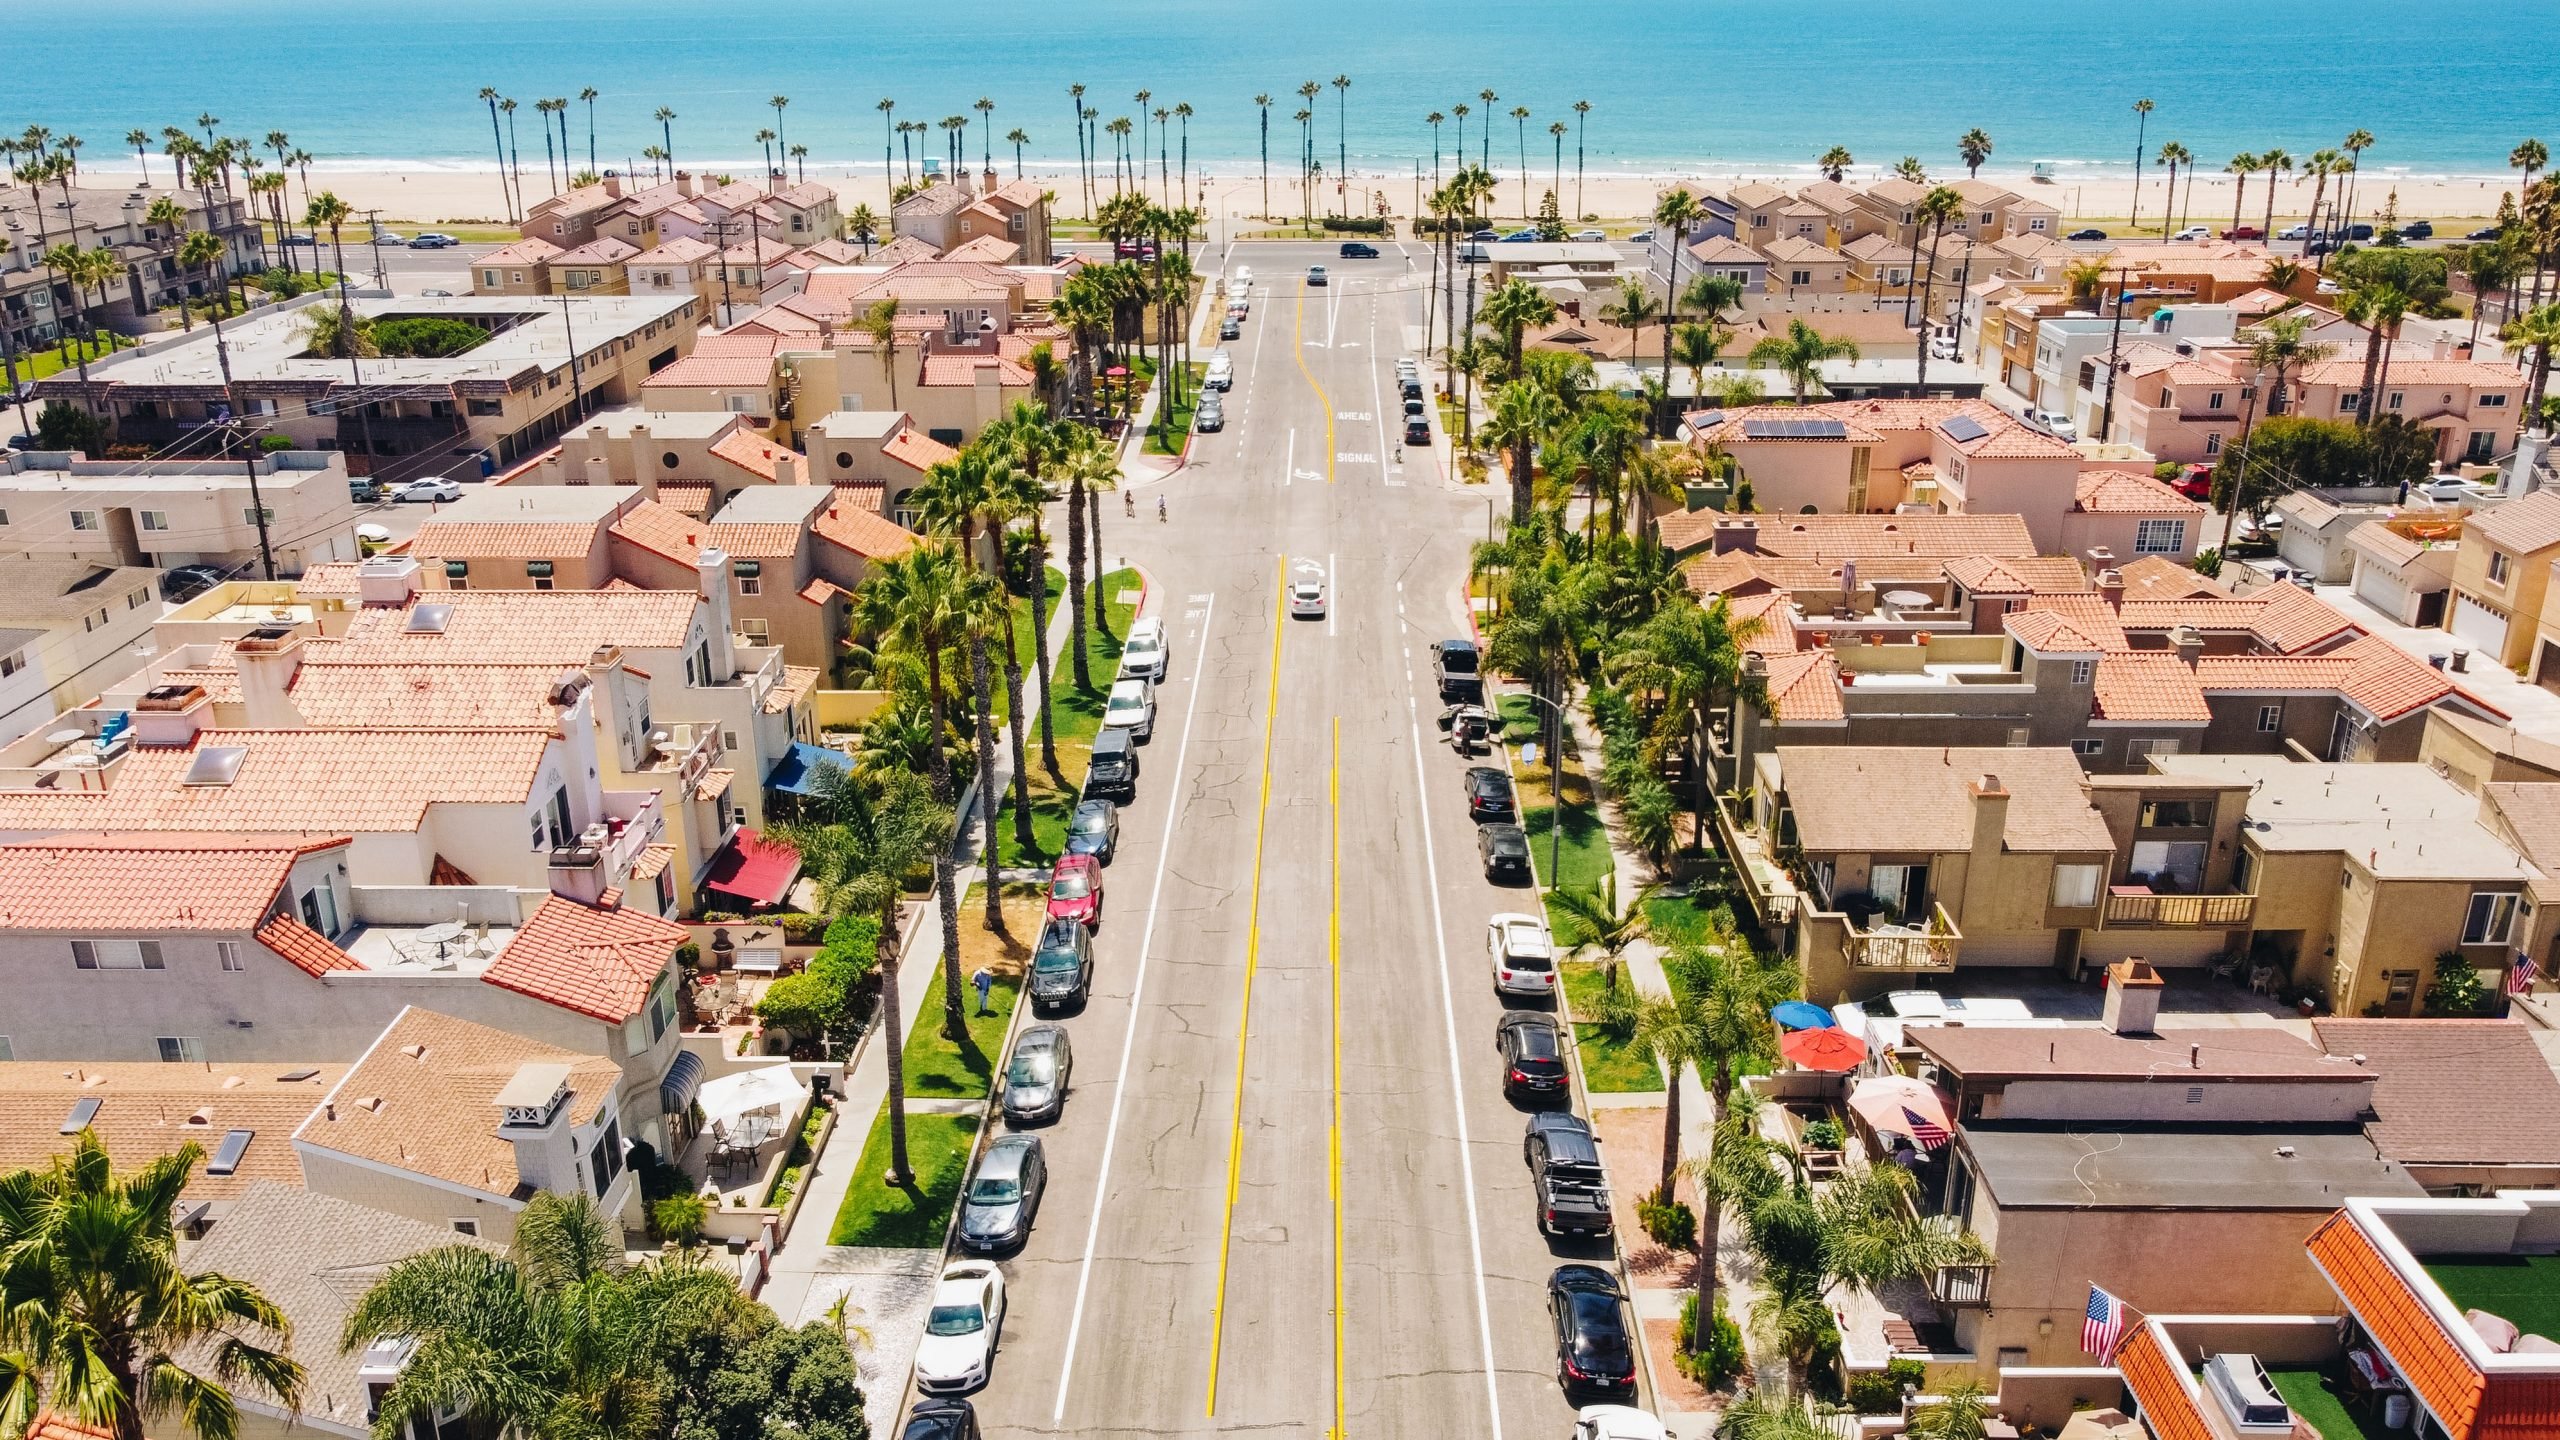 How To Get From Long Beach Airport To Huntington Beach - All Possible Ways, cheapest way from Long Beach airport to Huntington Beach, Long Beach airport to Huntington Beach, Long Beach Airport Bus, Long Beach Airport Bus to Huntington Beach, Buses Long Beach, from Long Beach to Huntington Beach, from Long Beach to Huntington Beach